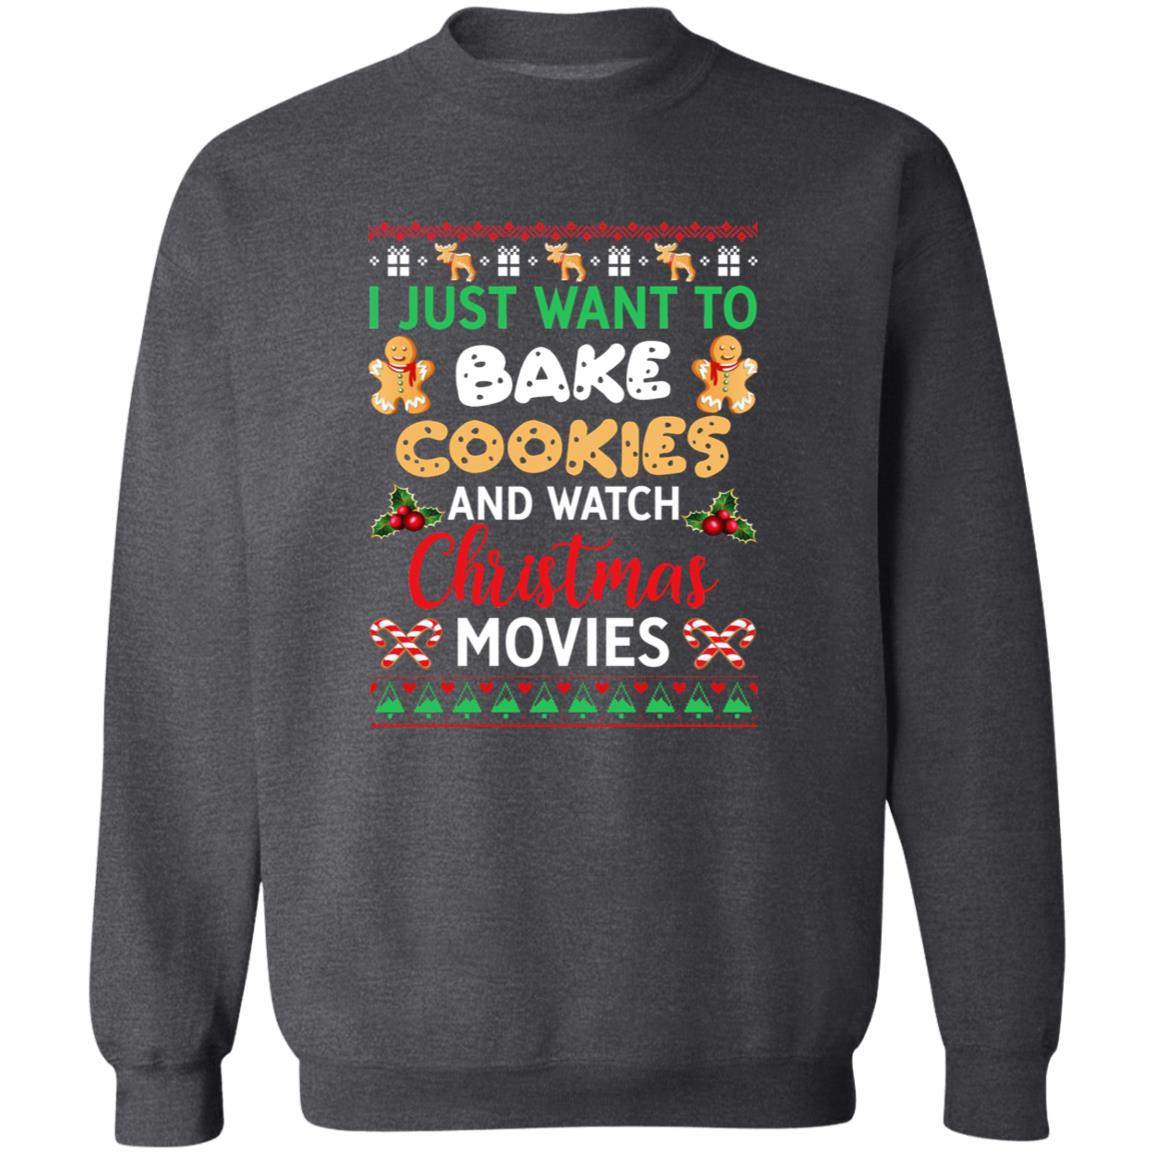 Cookies and movies Christmas Unisex Sweatshirt Ugly sweater Black Dark Heather-Family-Gift-Planet